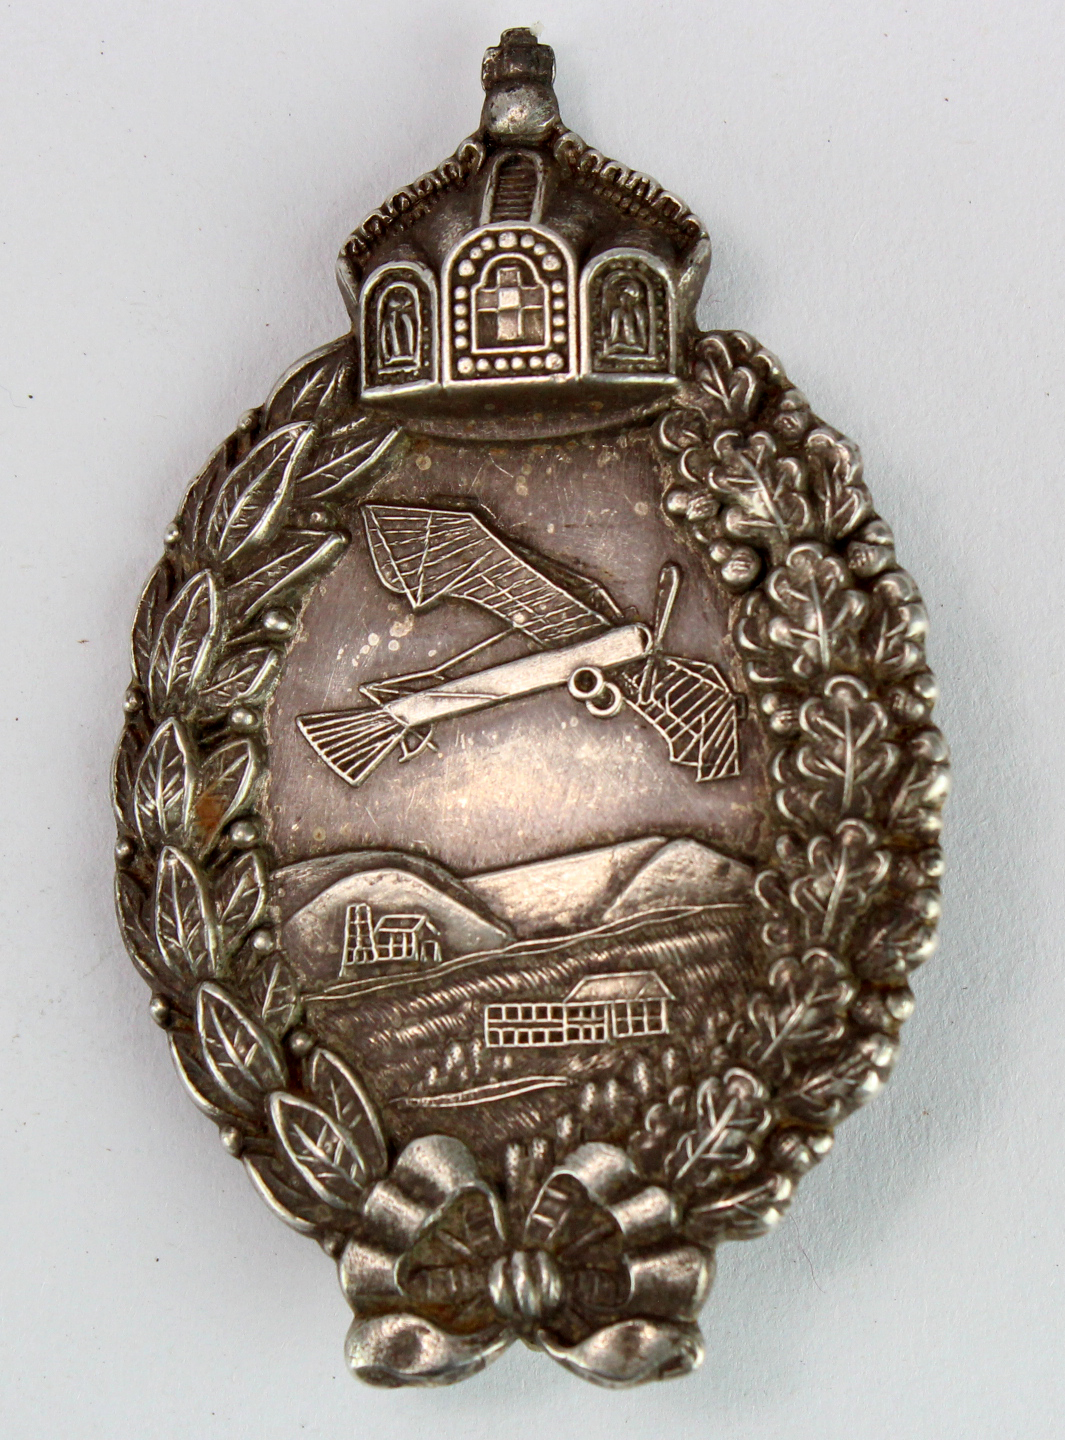 Imperial German Silver Pilots Badge. Hallmarked .800 with a crescent moon and crown.